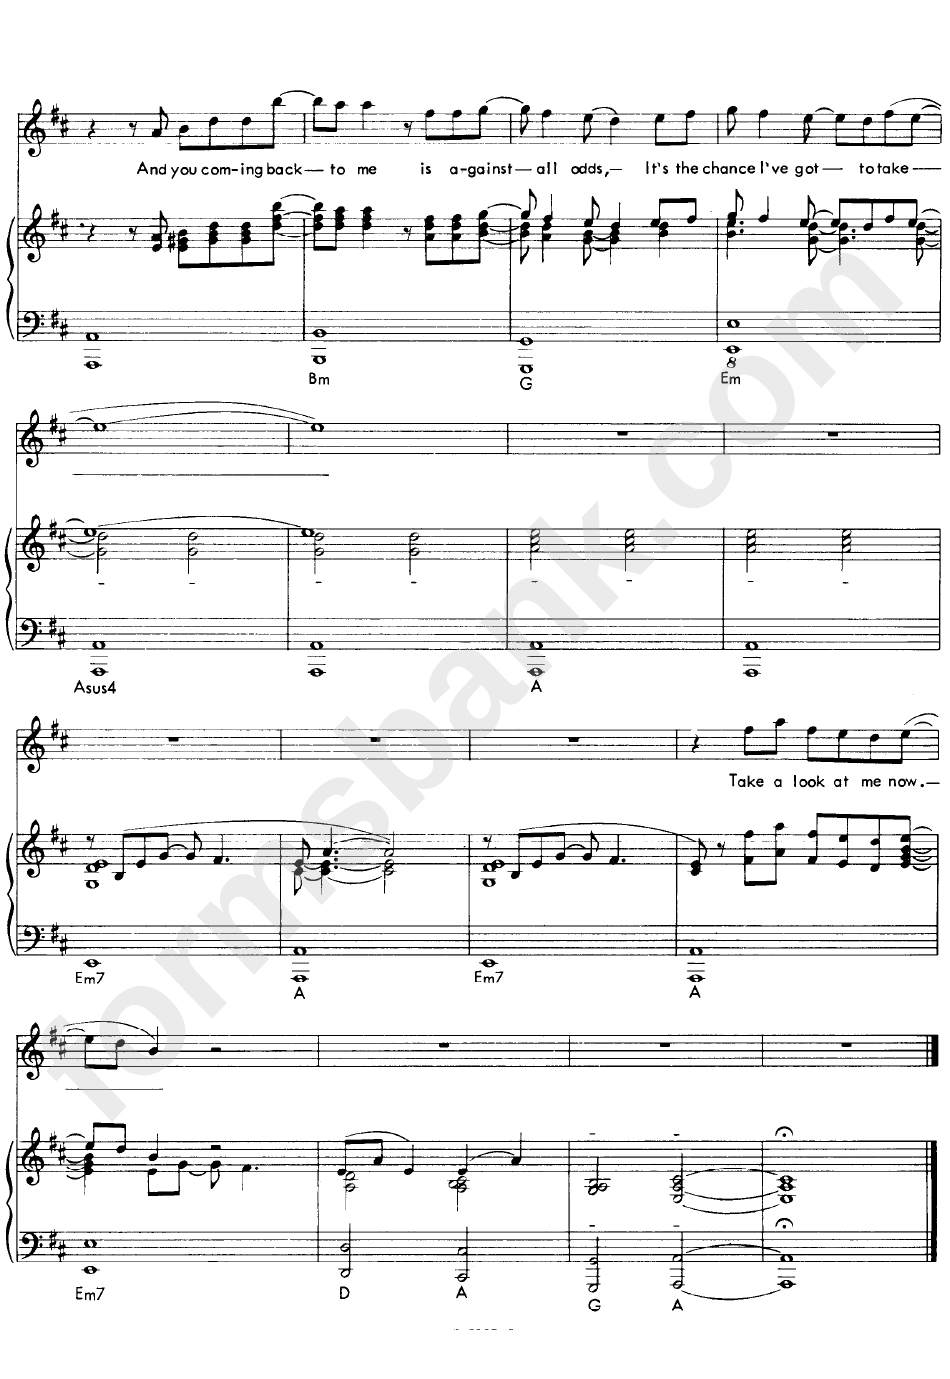 Phil Collins - Against All Odds Sheet Music